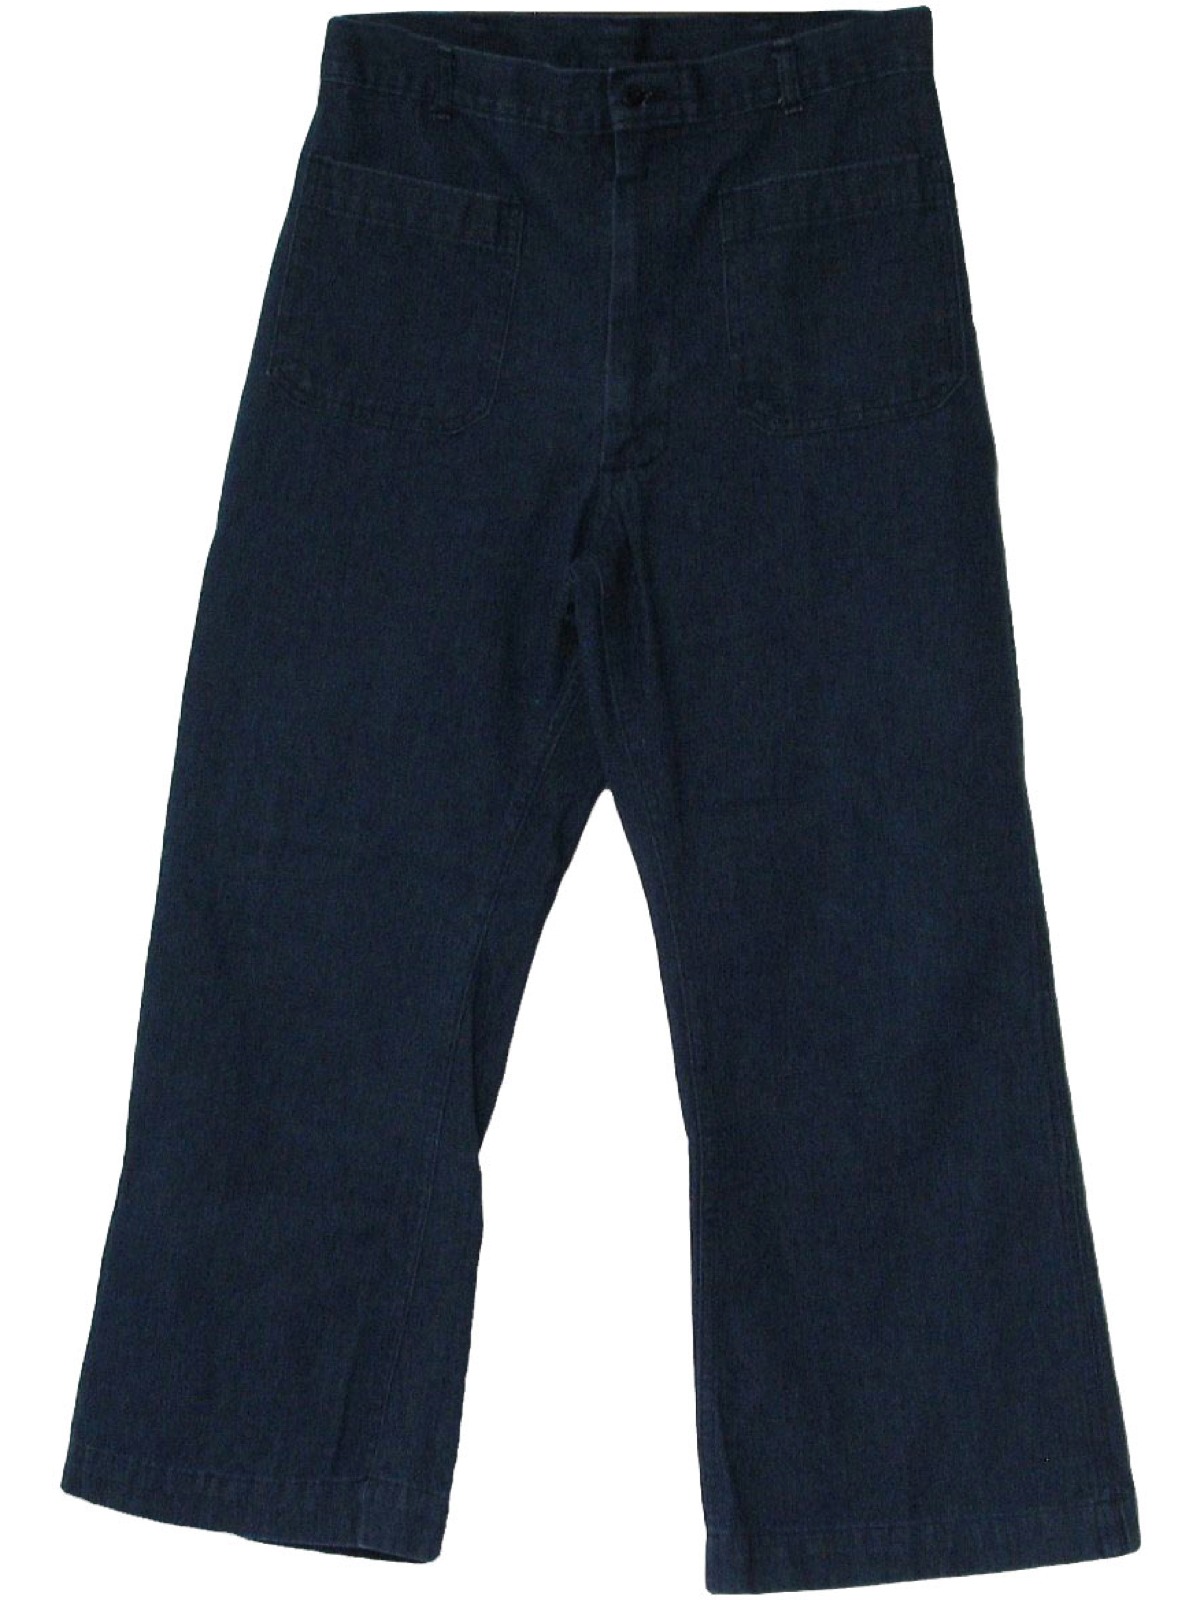 Retro 60's Bellbottom Pants: 60s -Coastal Ind.- Mens blue cotton and ...